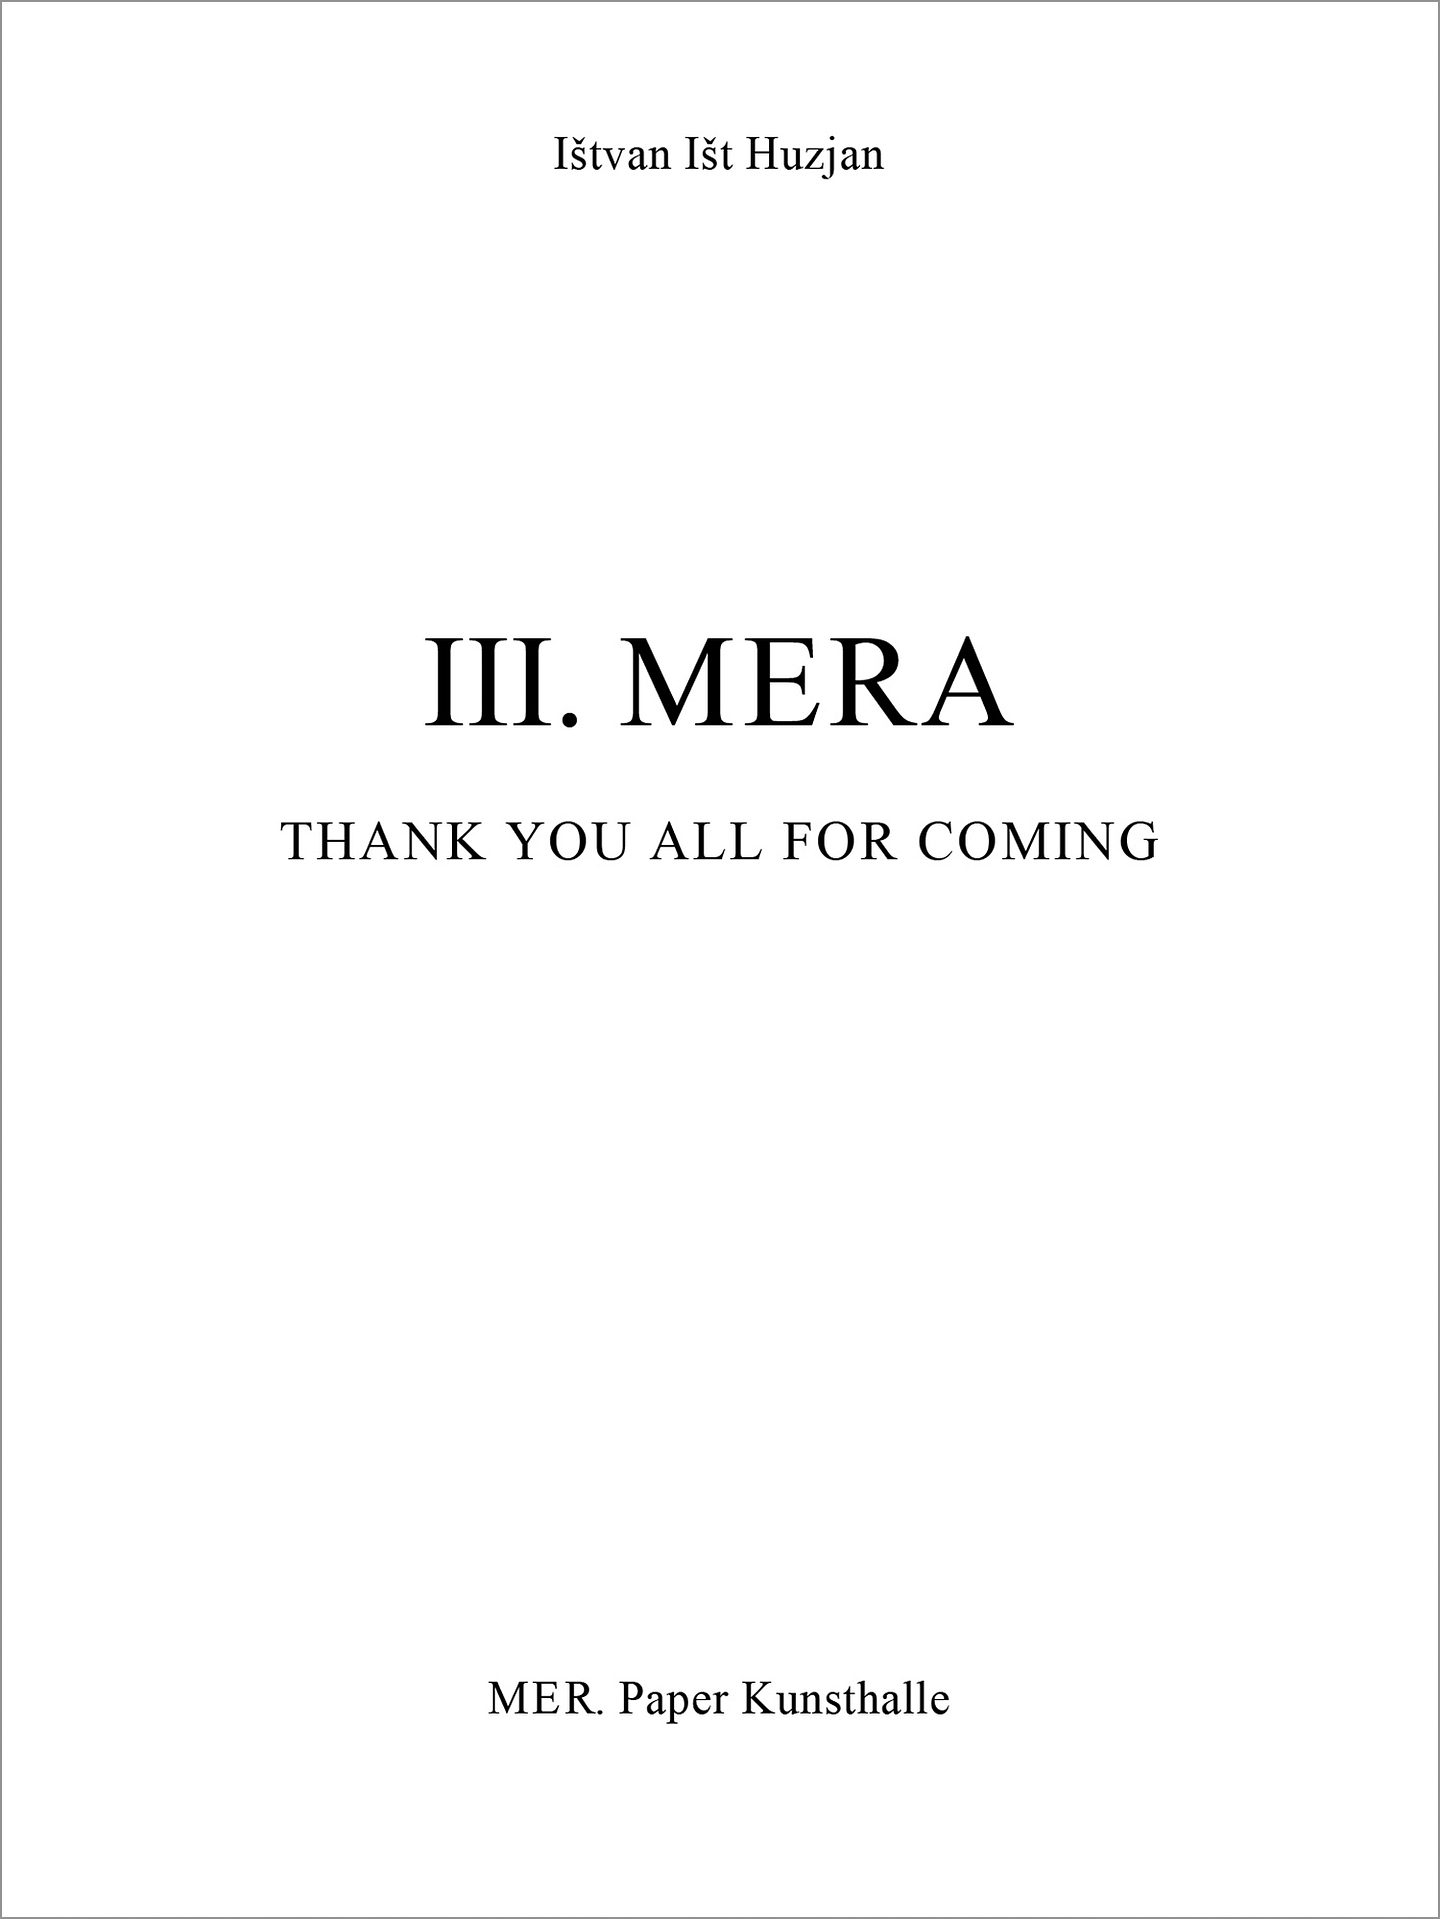 III. MERA: Thank You All For Coming